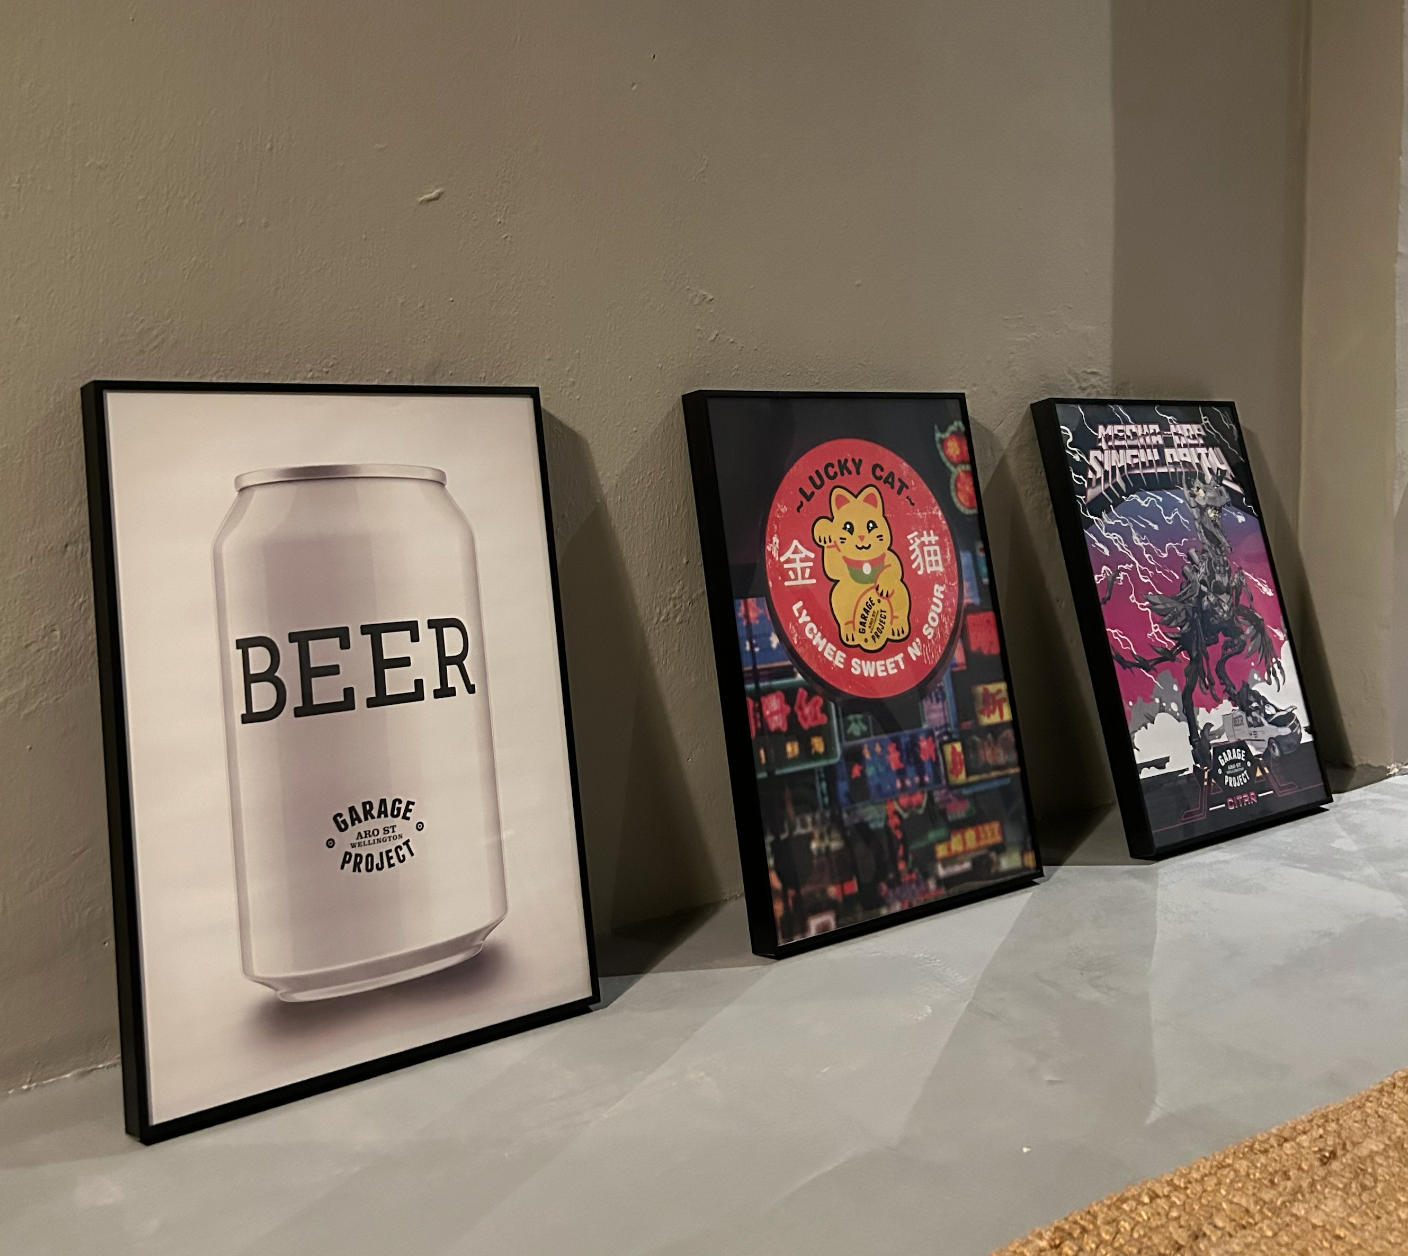 Garage Project Party & Bullshit Poster with Wall Mountable Metal Frame